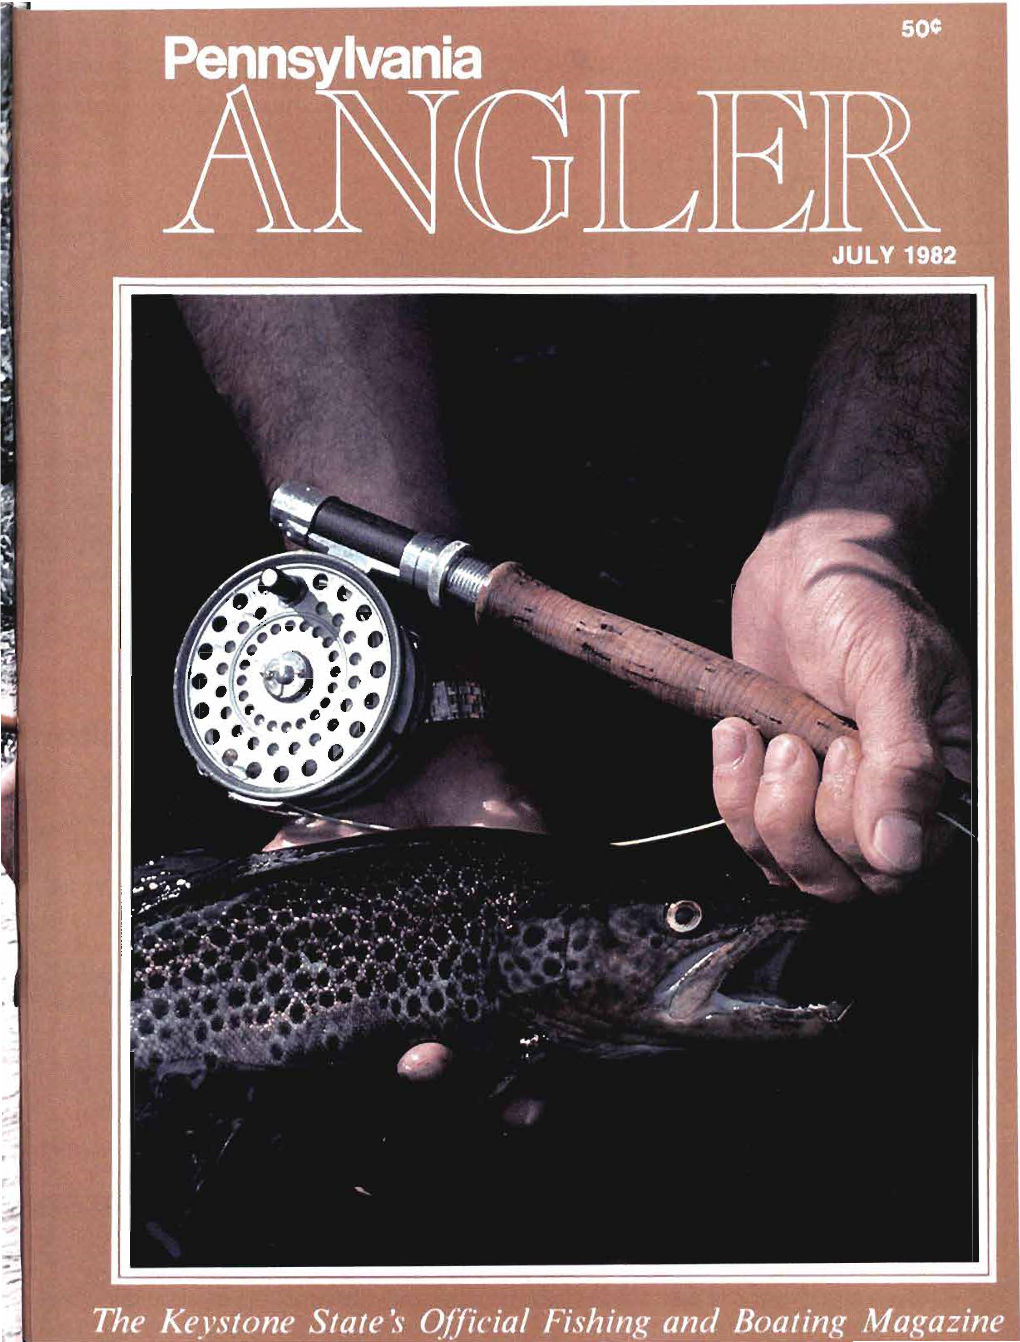 The Keystone State's Offieial Fishing and Boating Magazine STRAIGHT